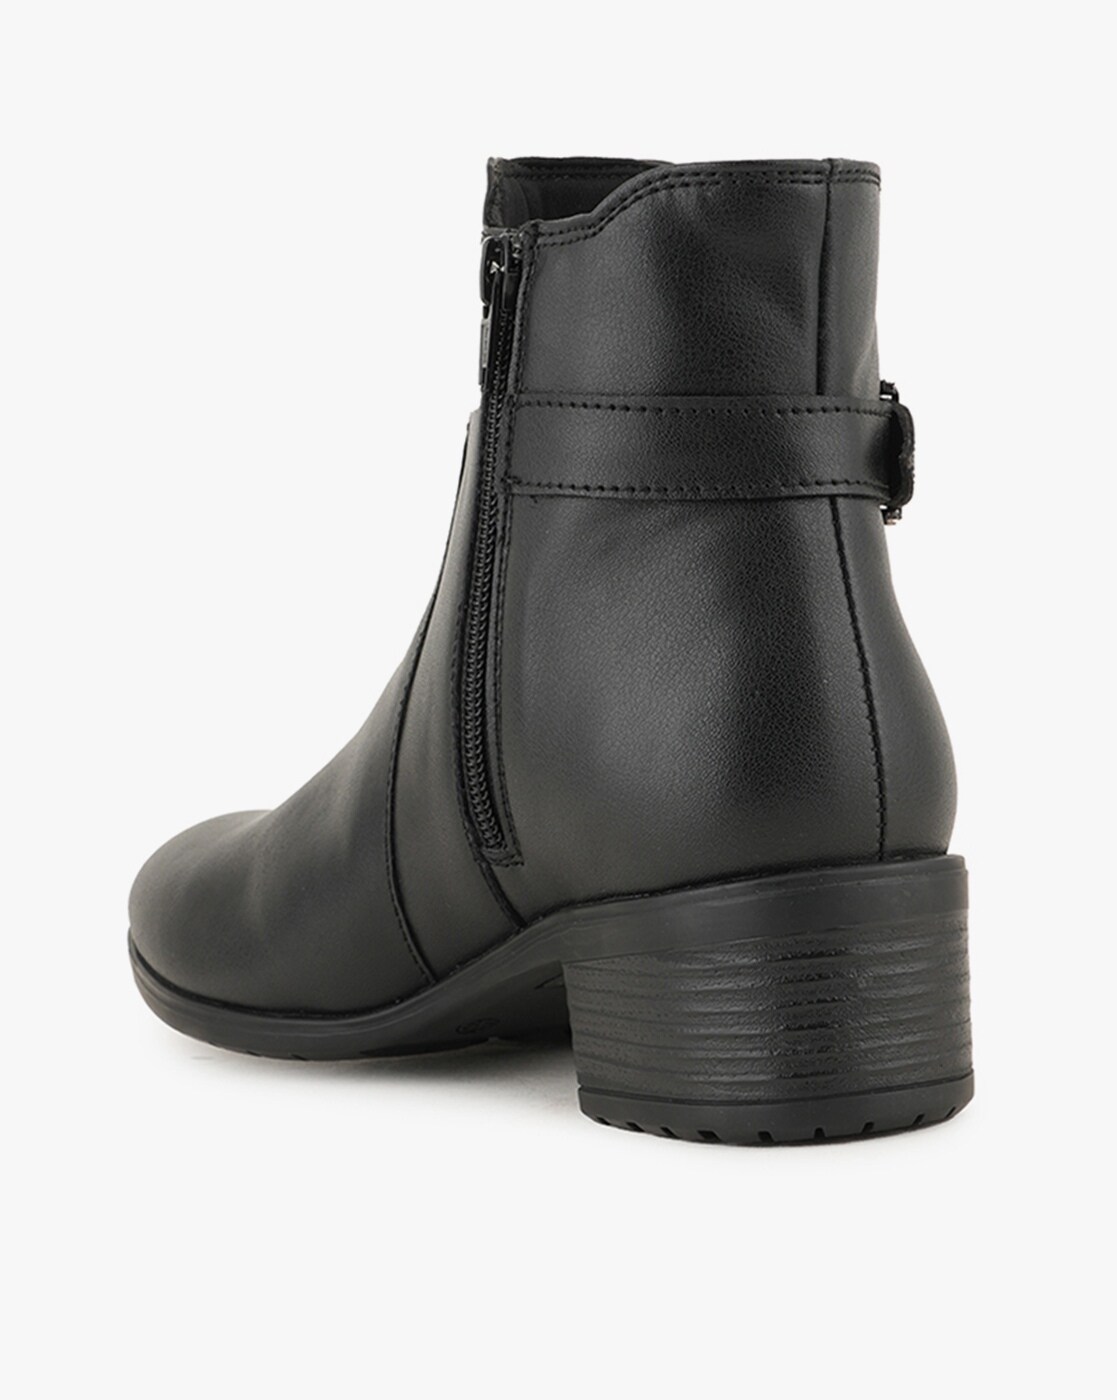 Buy Black Boots for Women by Everqupid Online